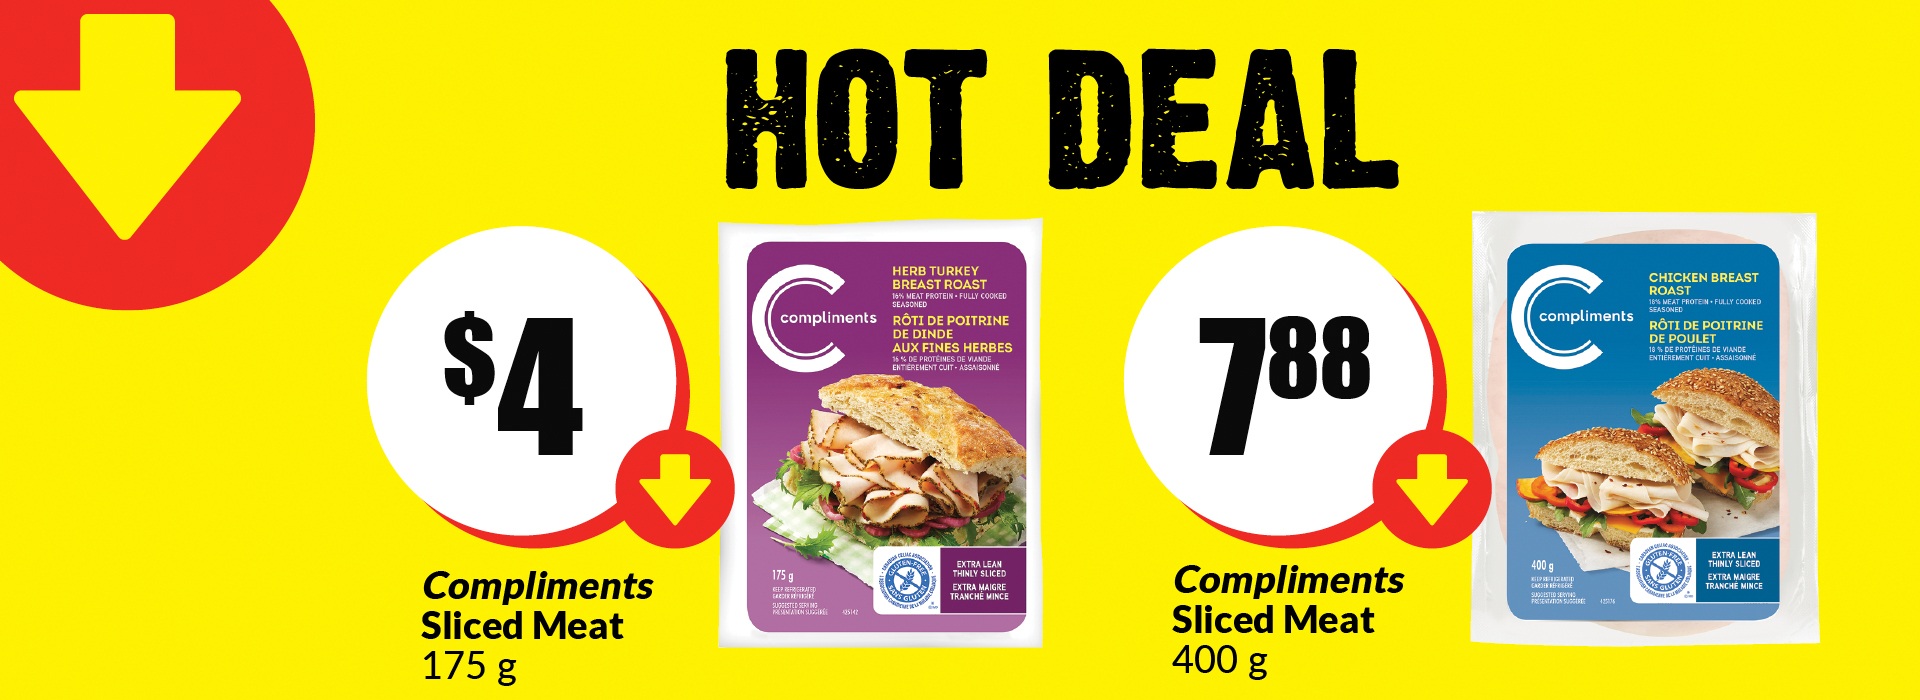 The following image contains the text, "Hot deal, Compliments sliced meat 175g get them at $4. " Compliments sliced meat 400g at just $4.88."